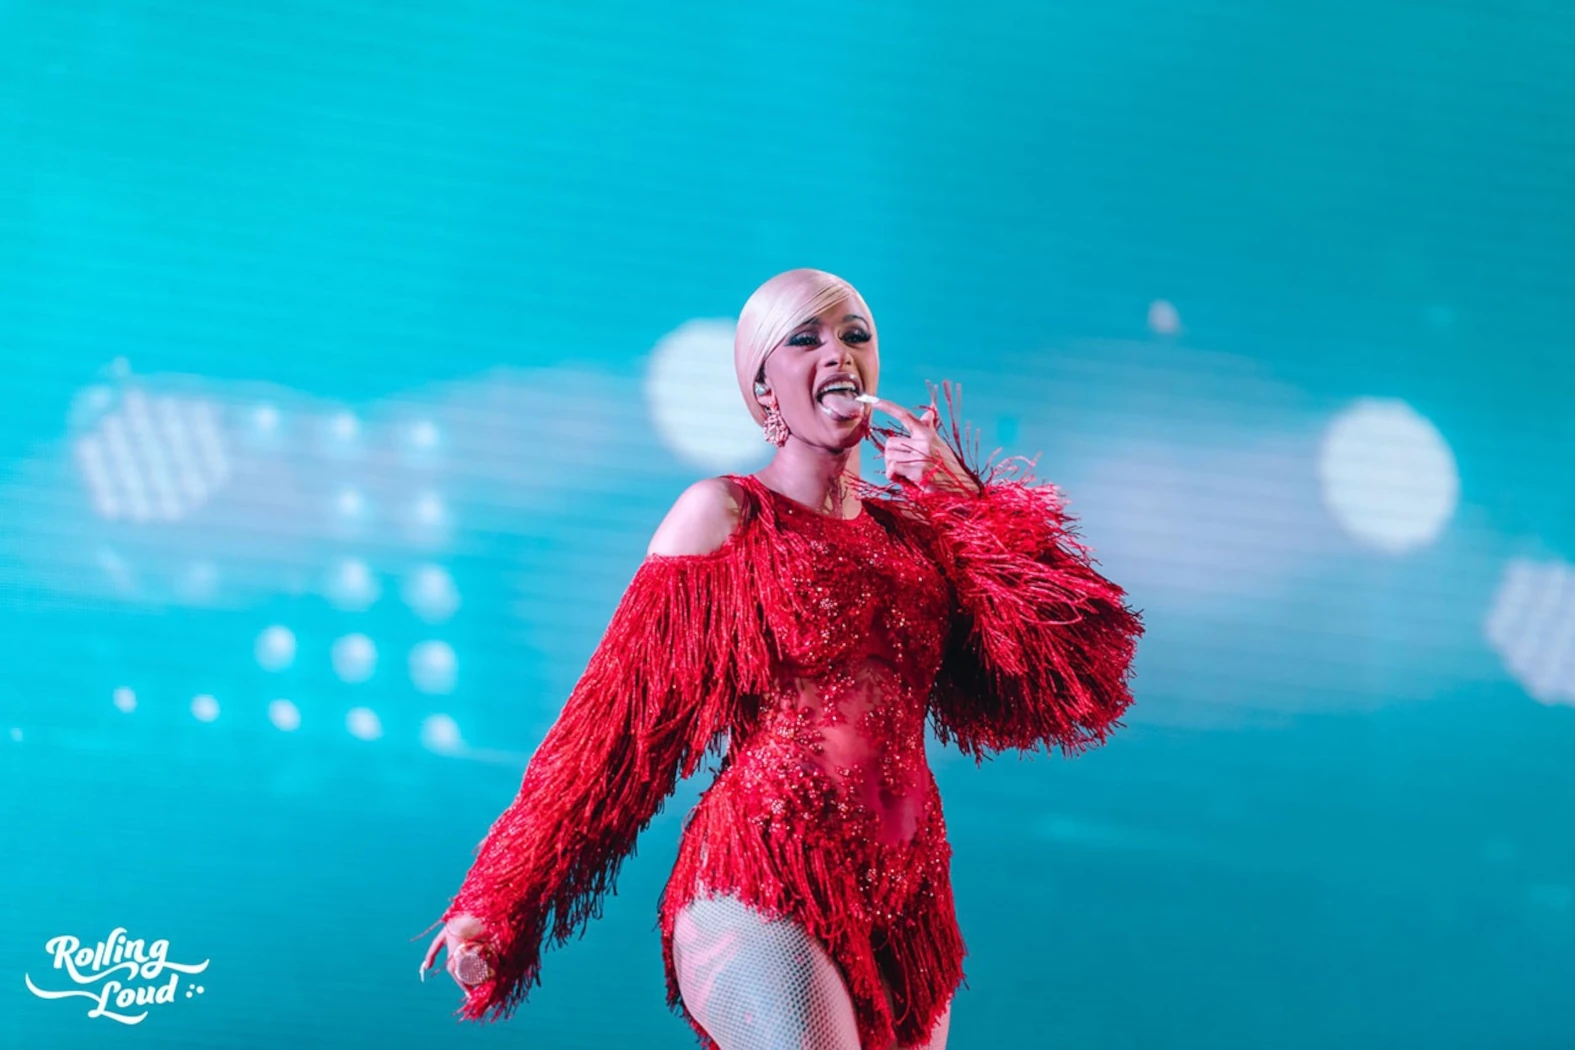 Cardi B performing at the Rolling Loud Thailand festival.